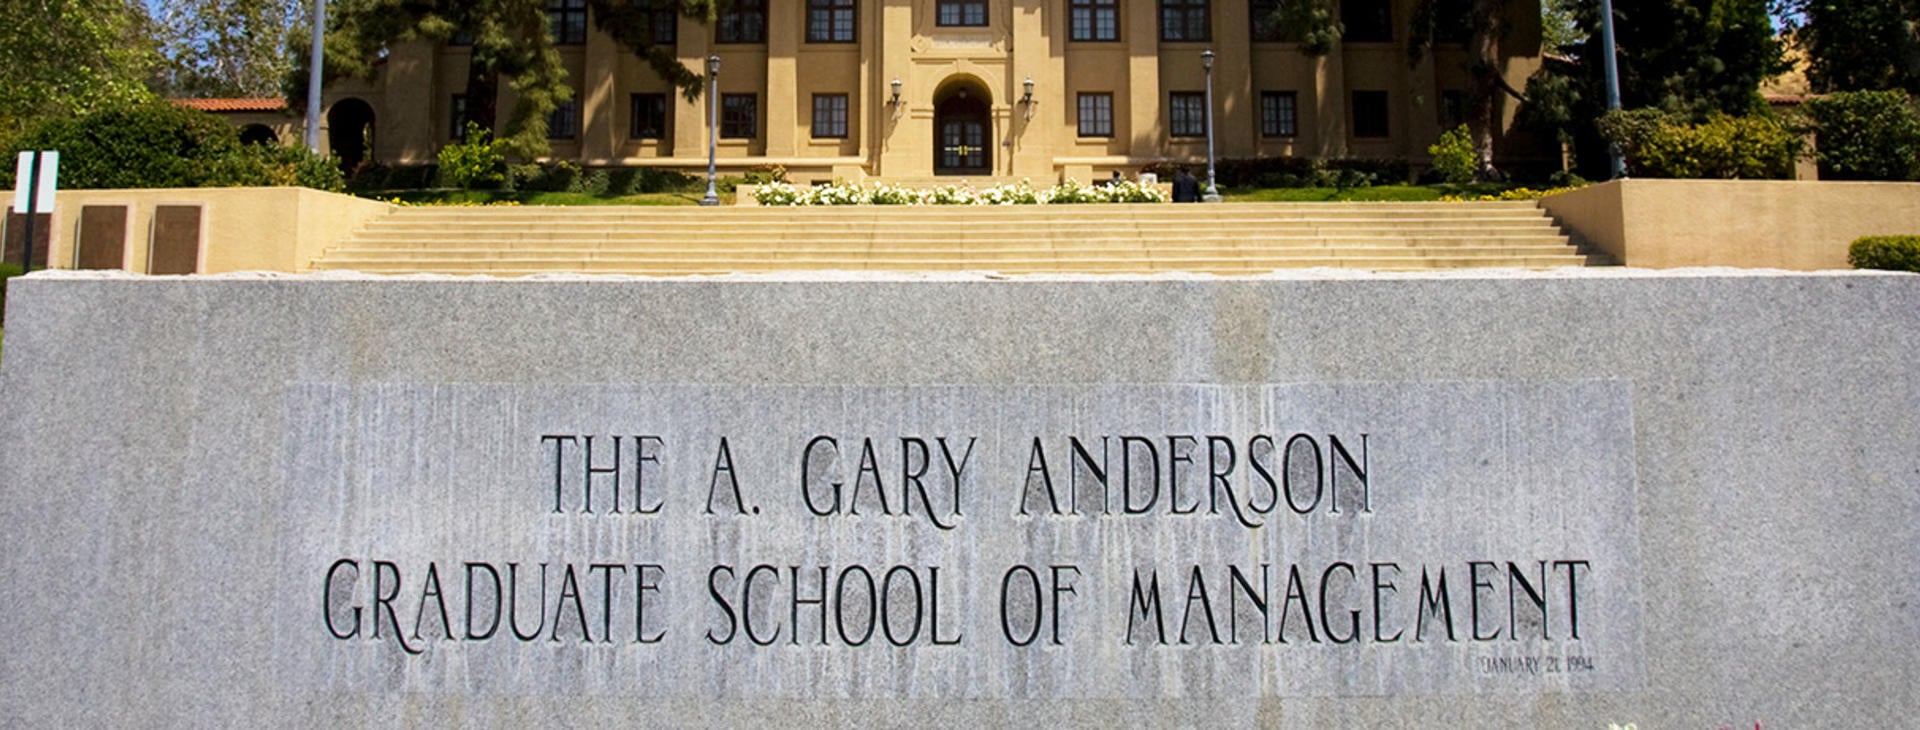 UCR School of Business - Our History - A. Gary Anderson